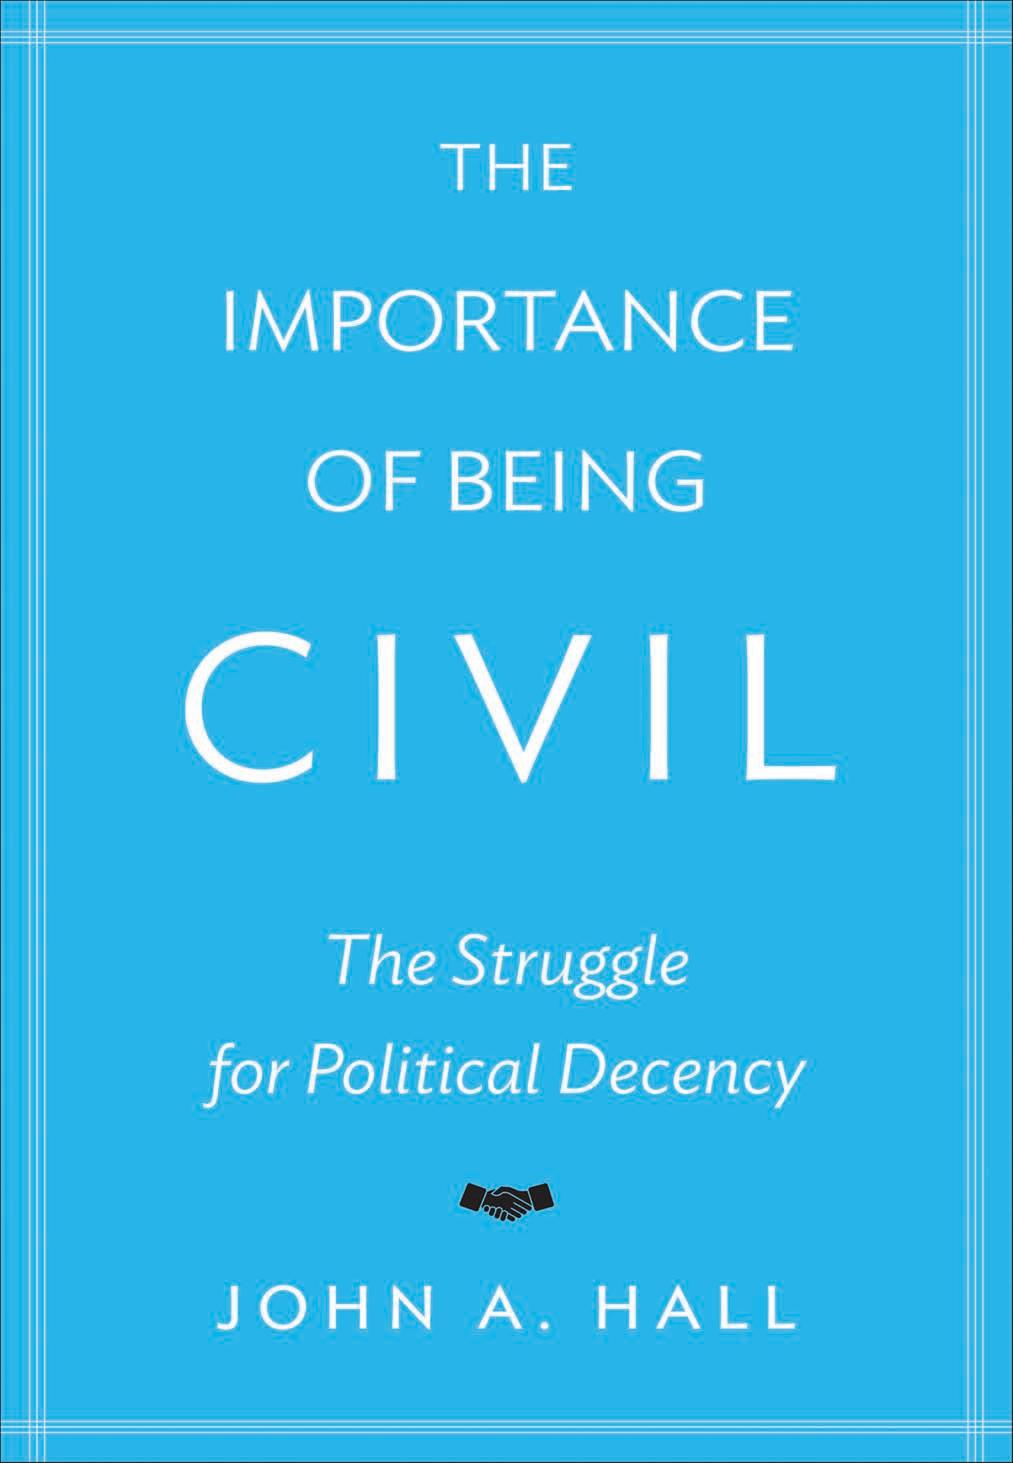 The Importance of Being Civil: The Struggle for Political Decency by John A. Hall